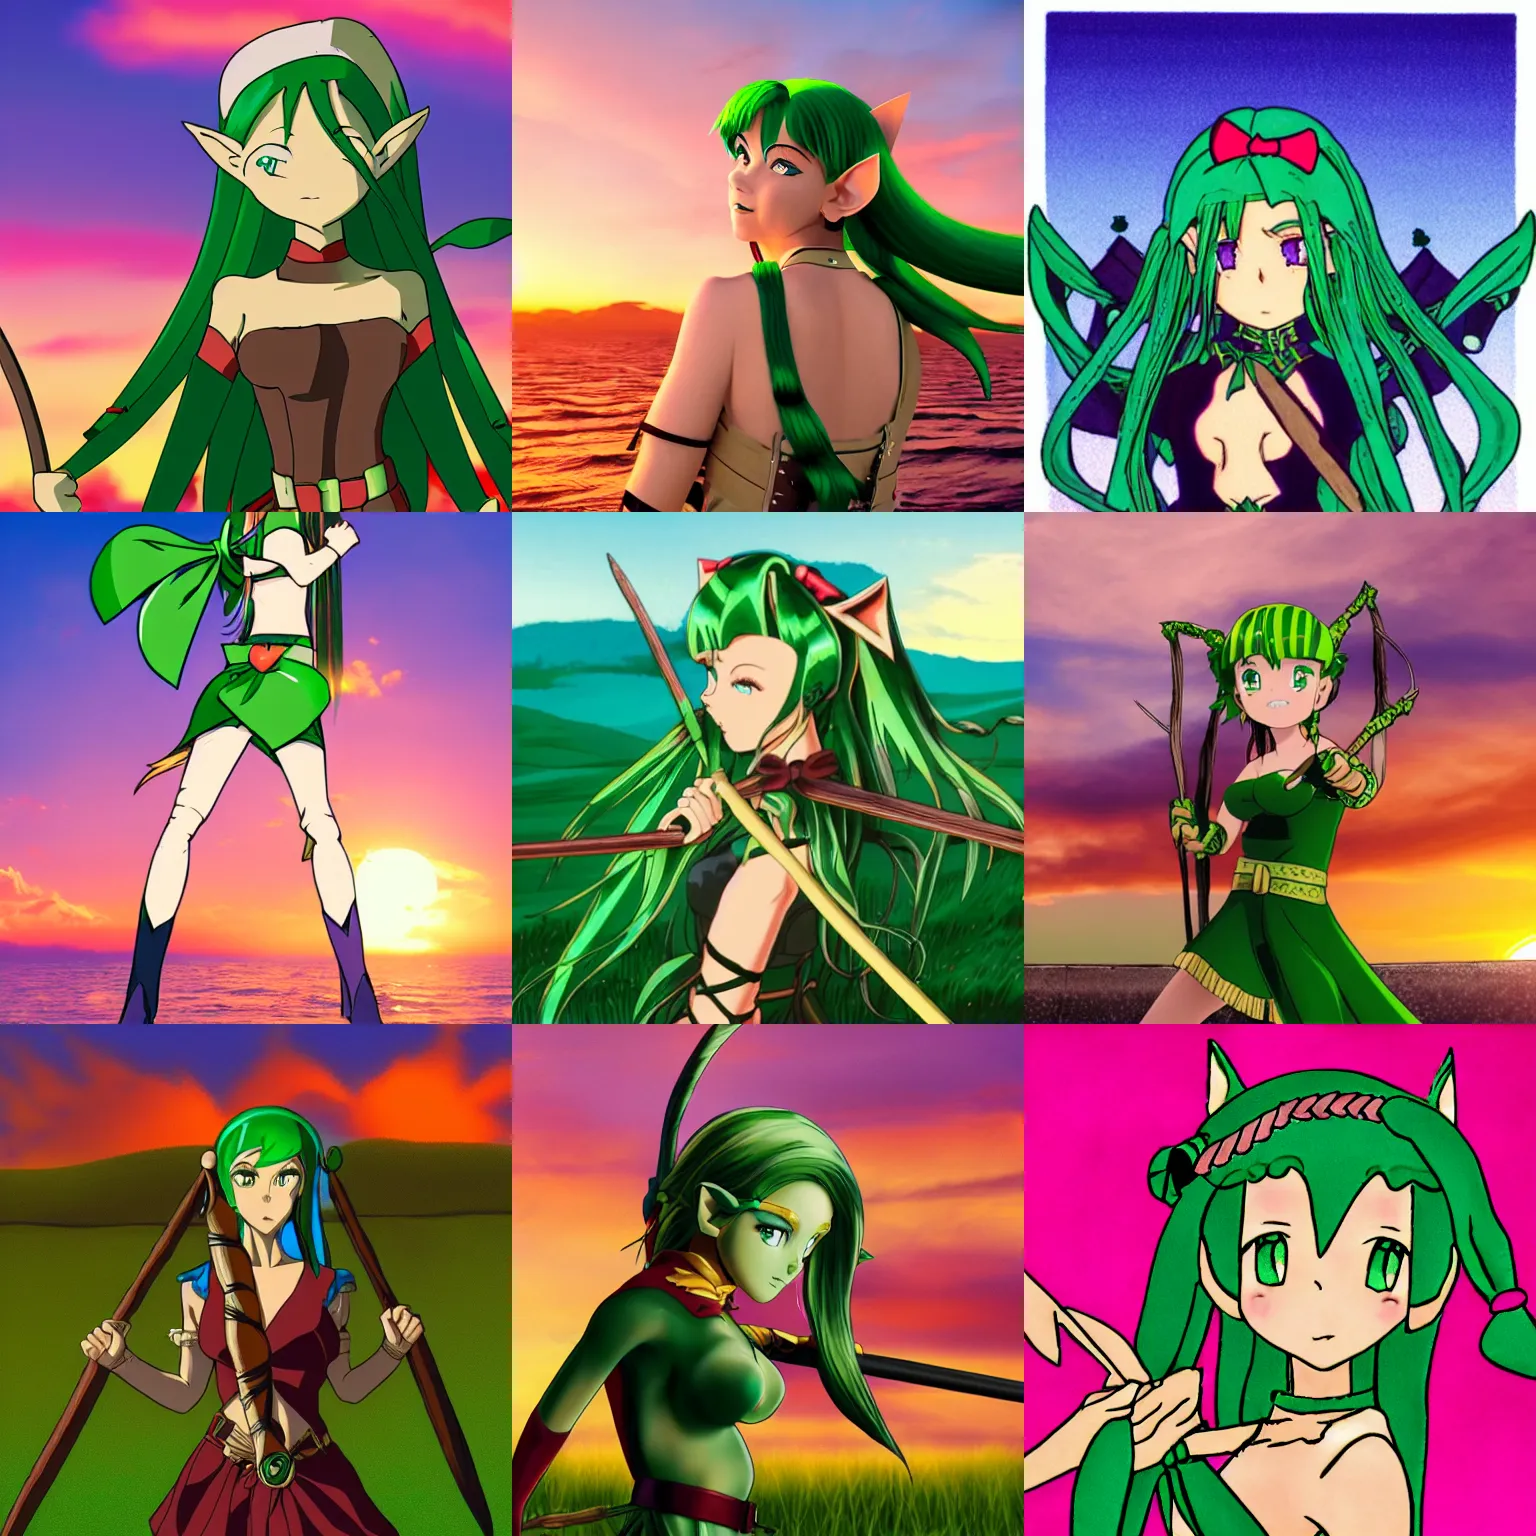 Prompt: elf woman with green hair in a braid posing with a bow and quiver against a sunset background, 90s anime style